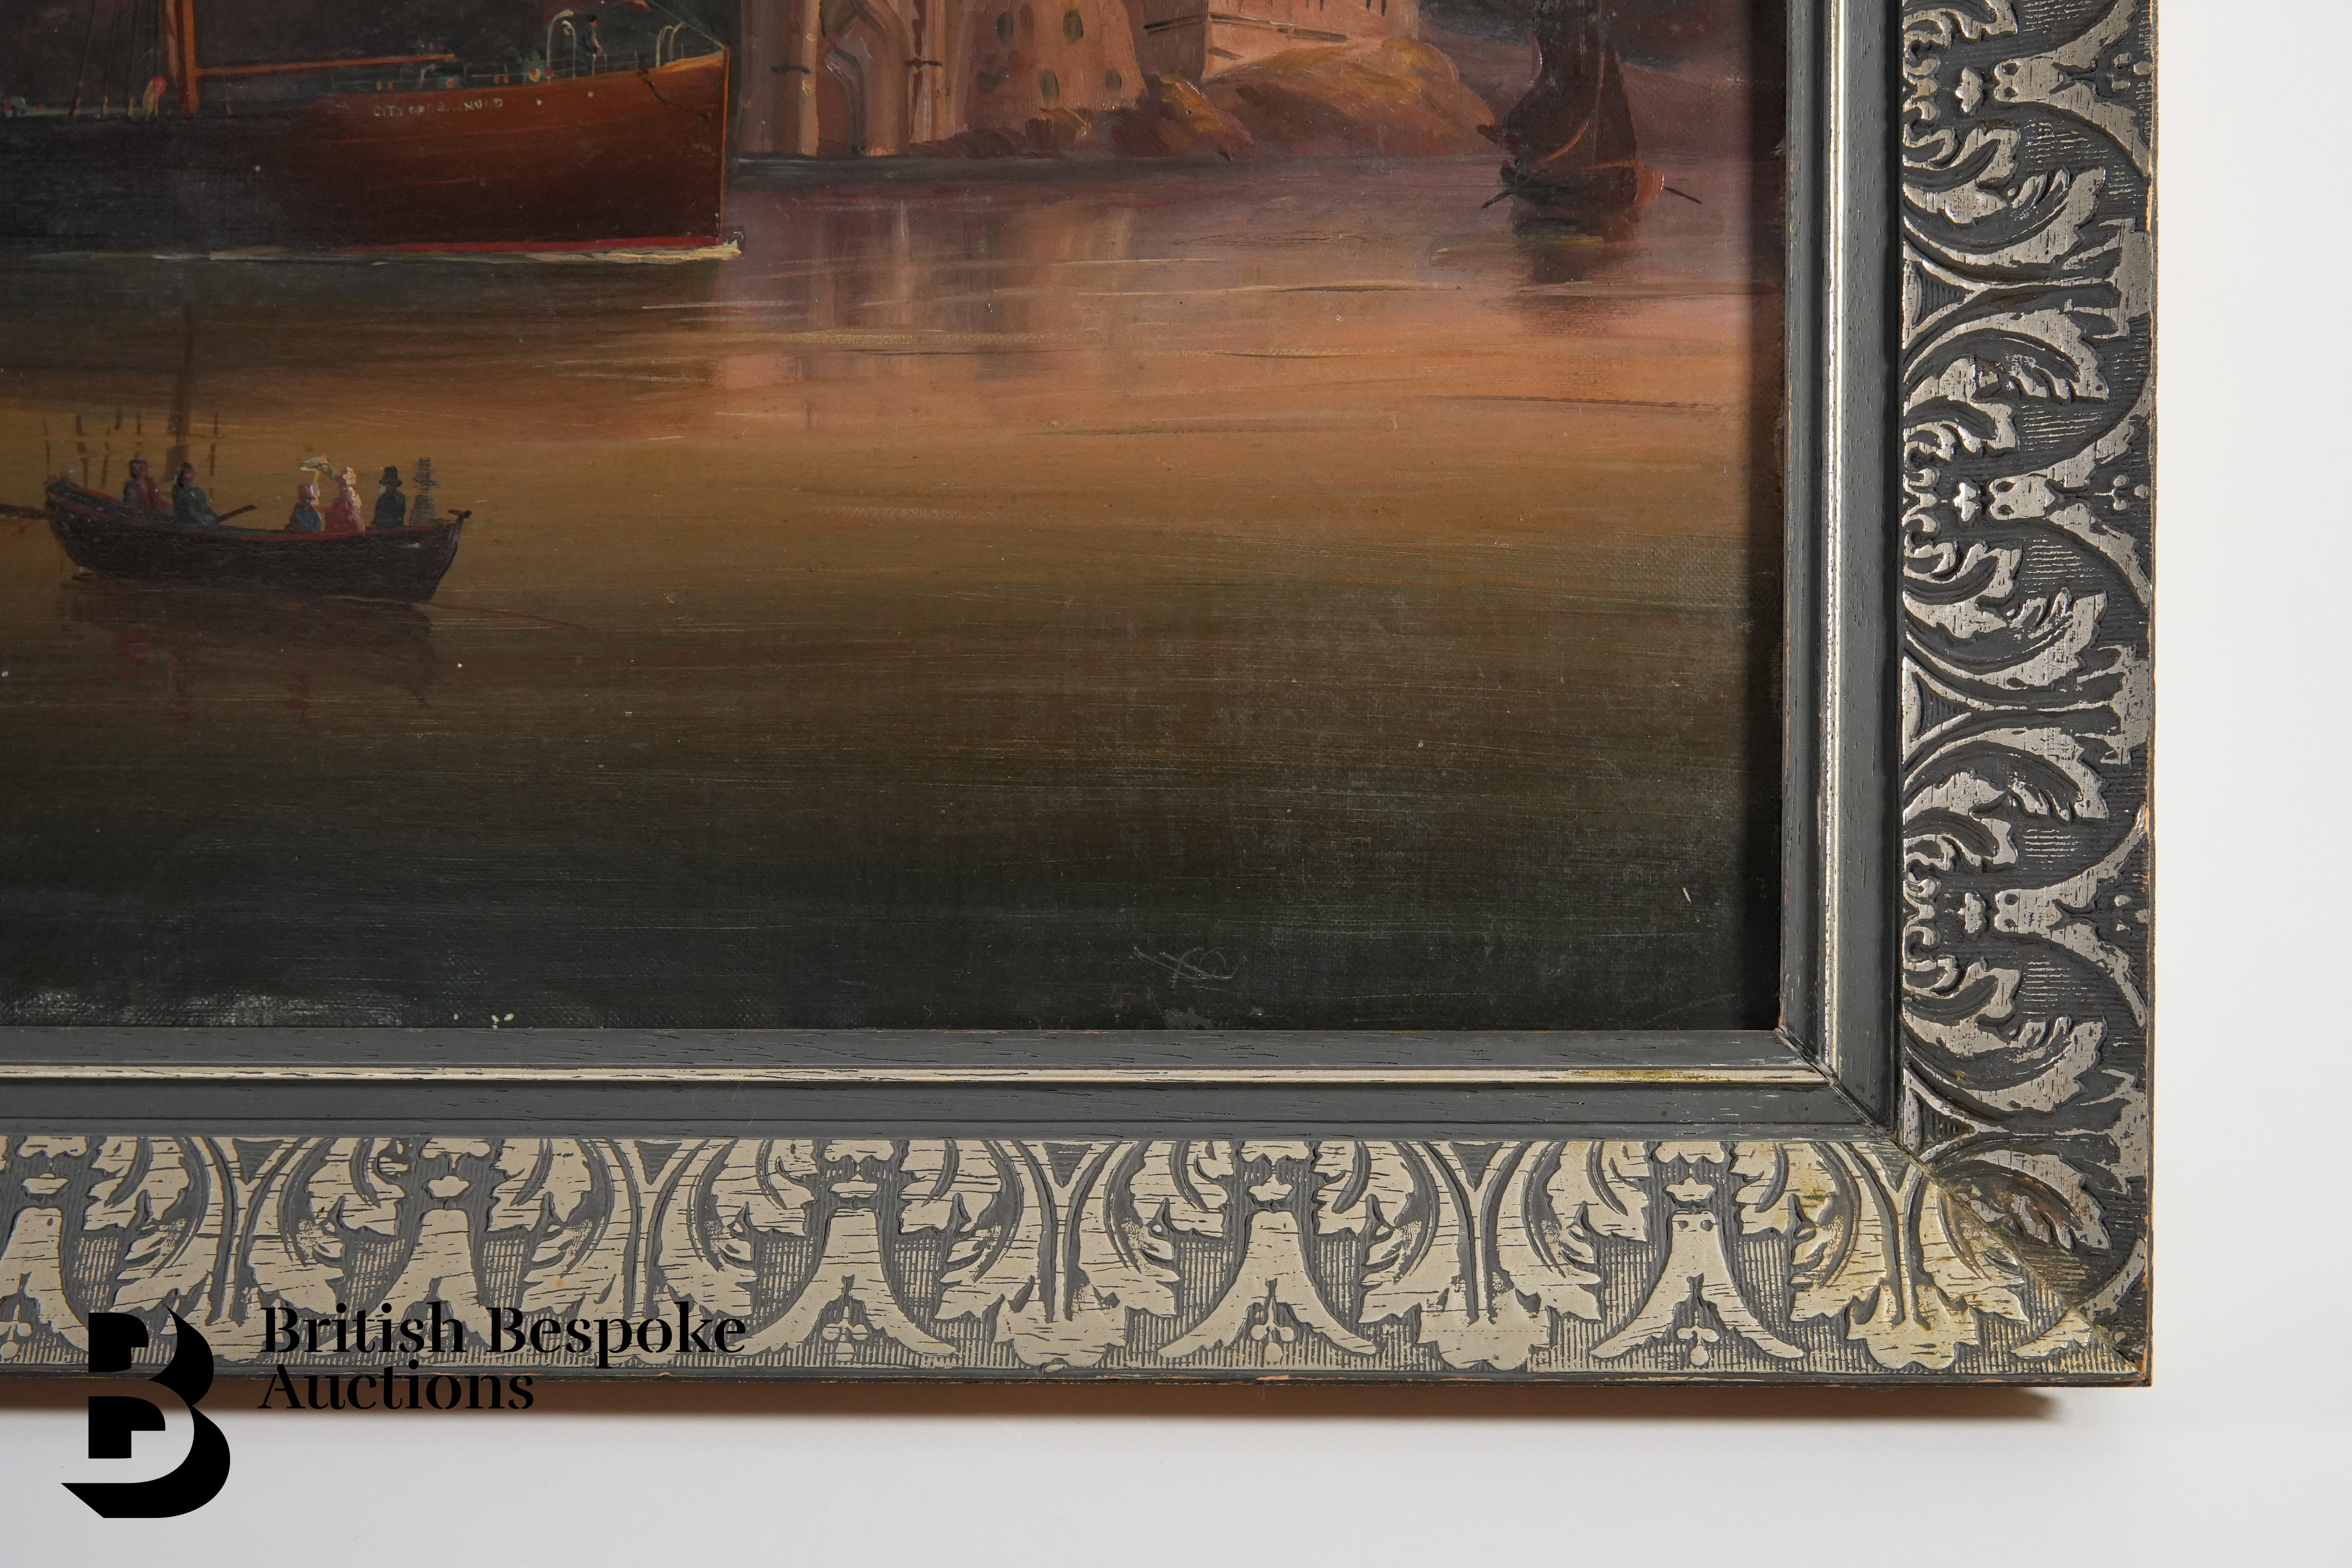 19th Century Oil on Canvas - Image 5 of 6